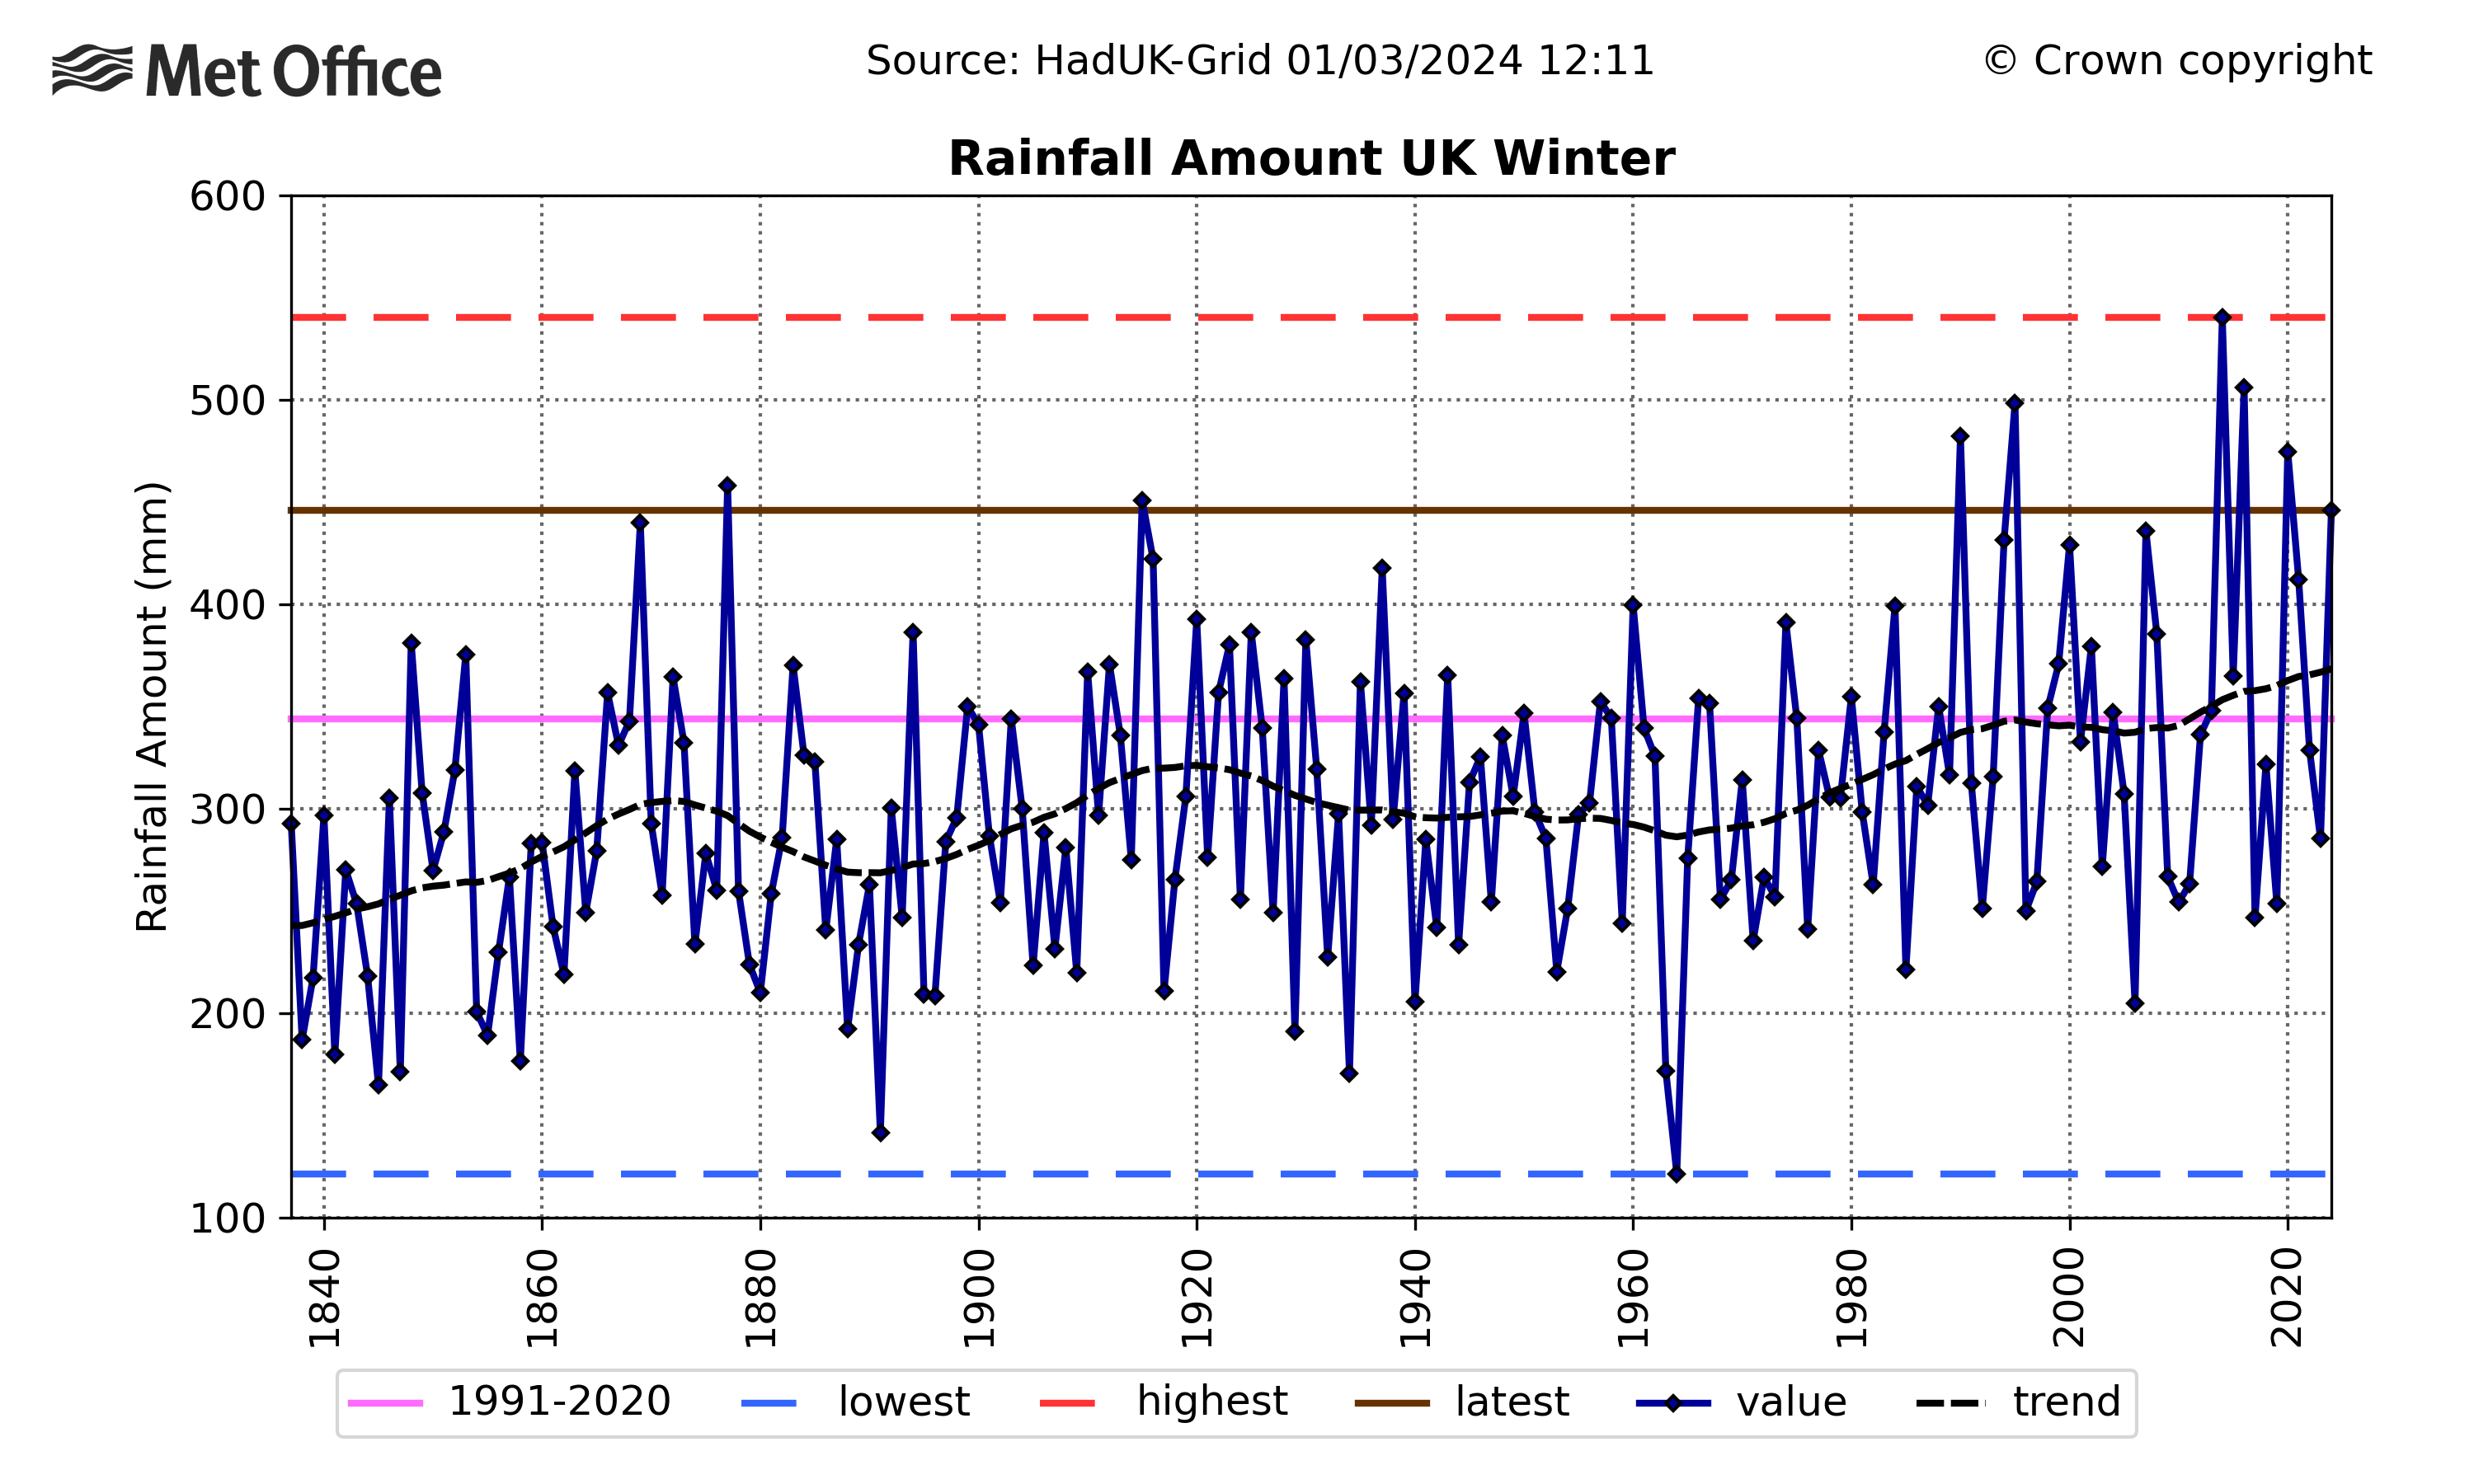 Graph showing UK winter rainfall every year. The graph shows much variability, but a slight trend towards wetter winters later in the period.